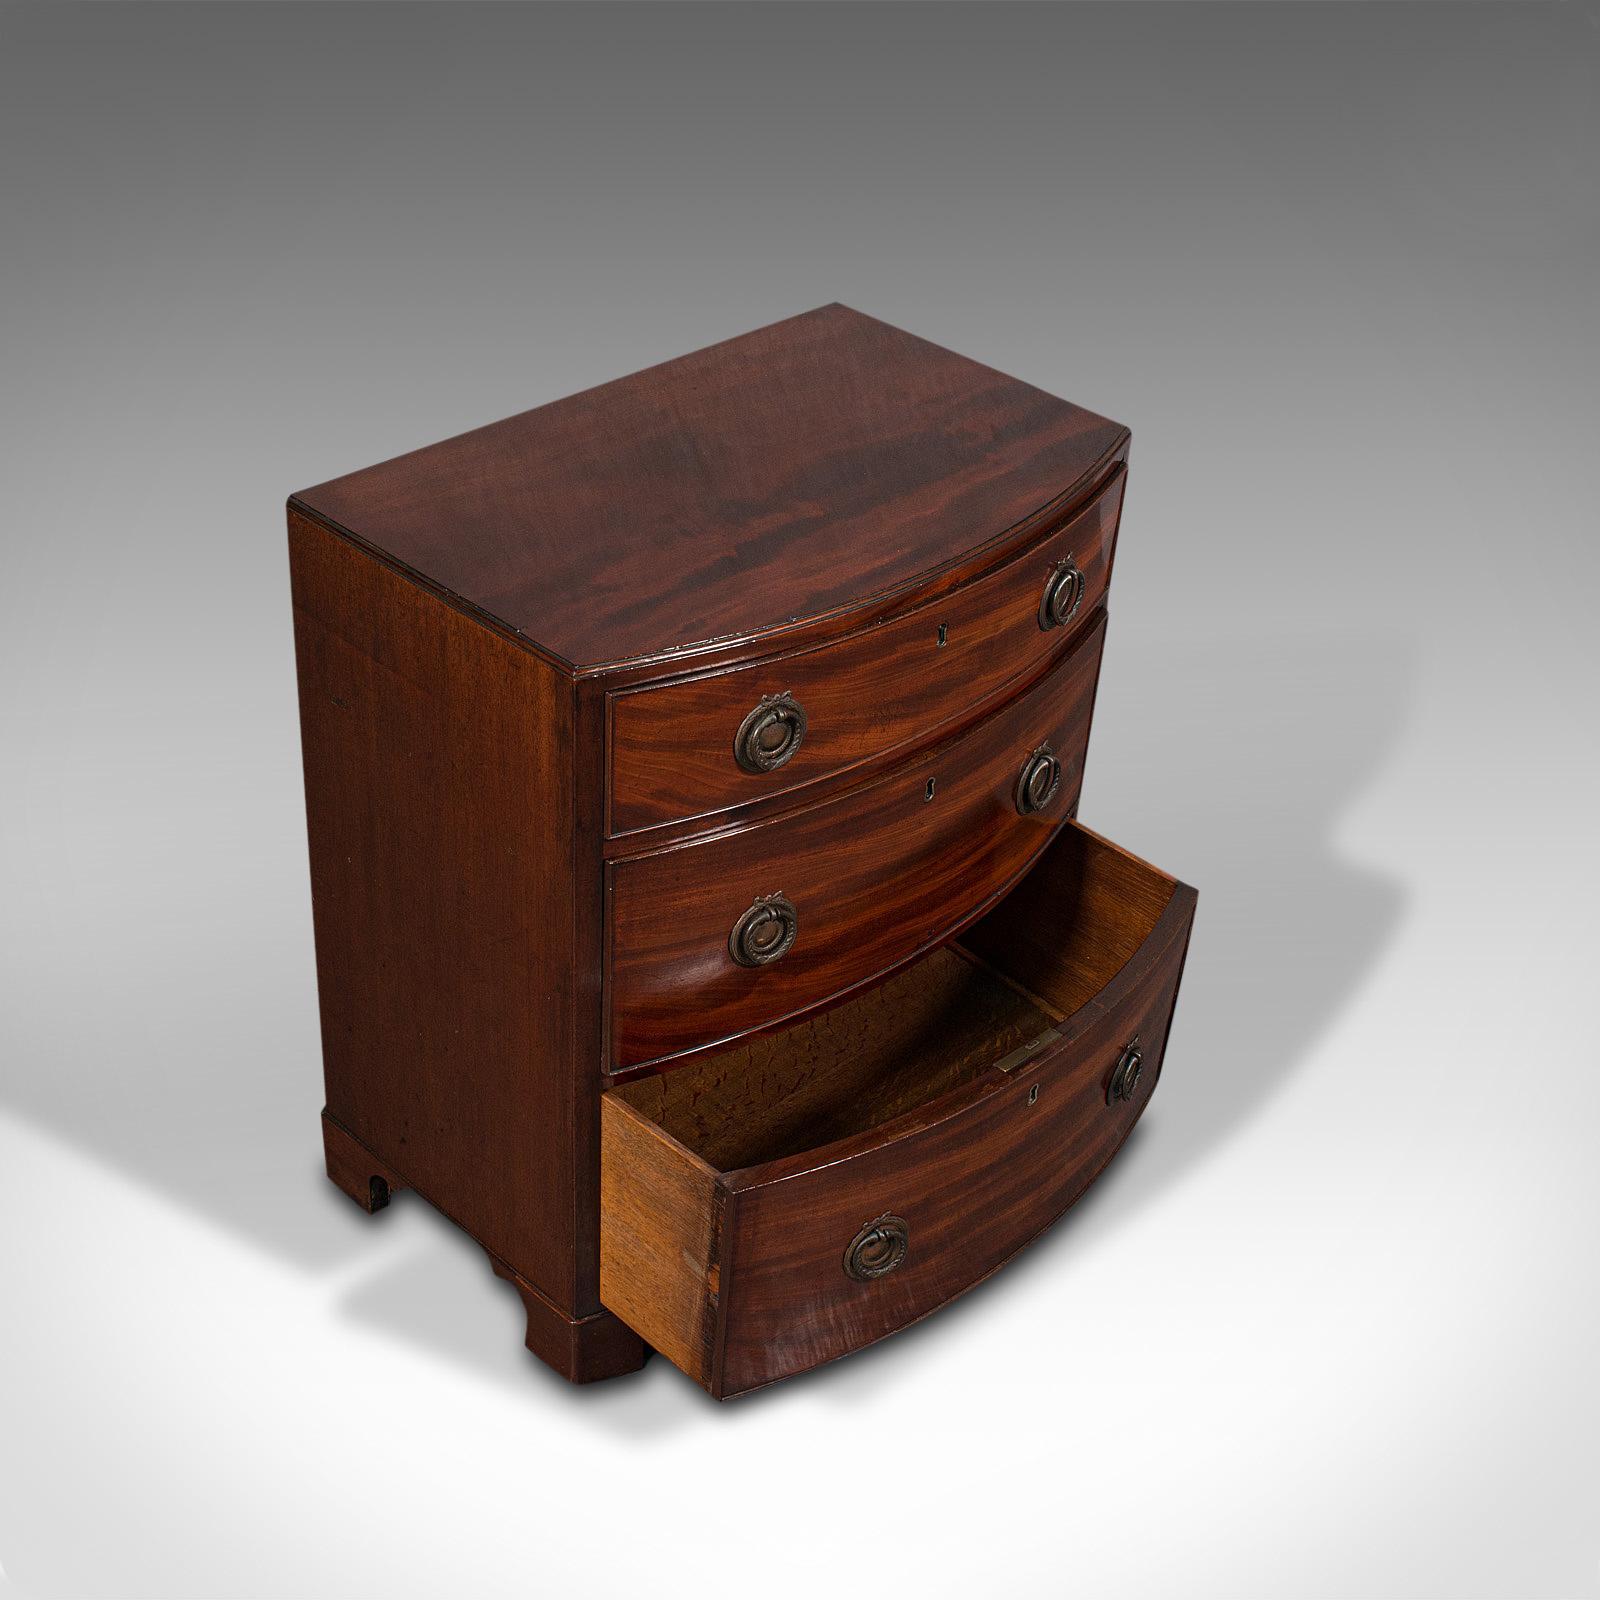 Compact Antique Chest of Drawers, English, Mahogany, Bedside Stand, Georgian 2